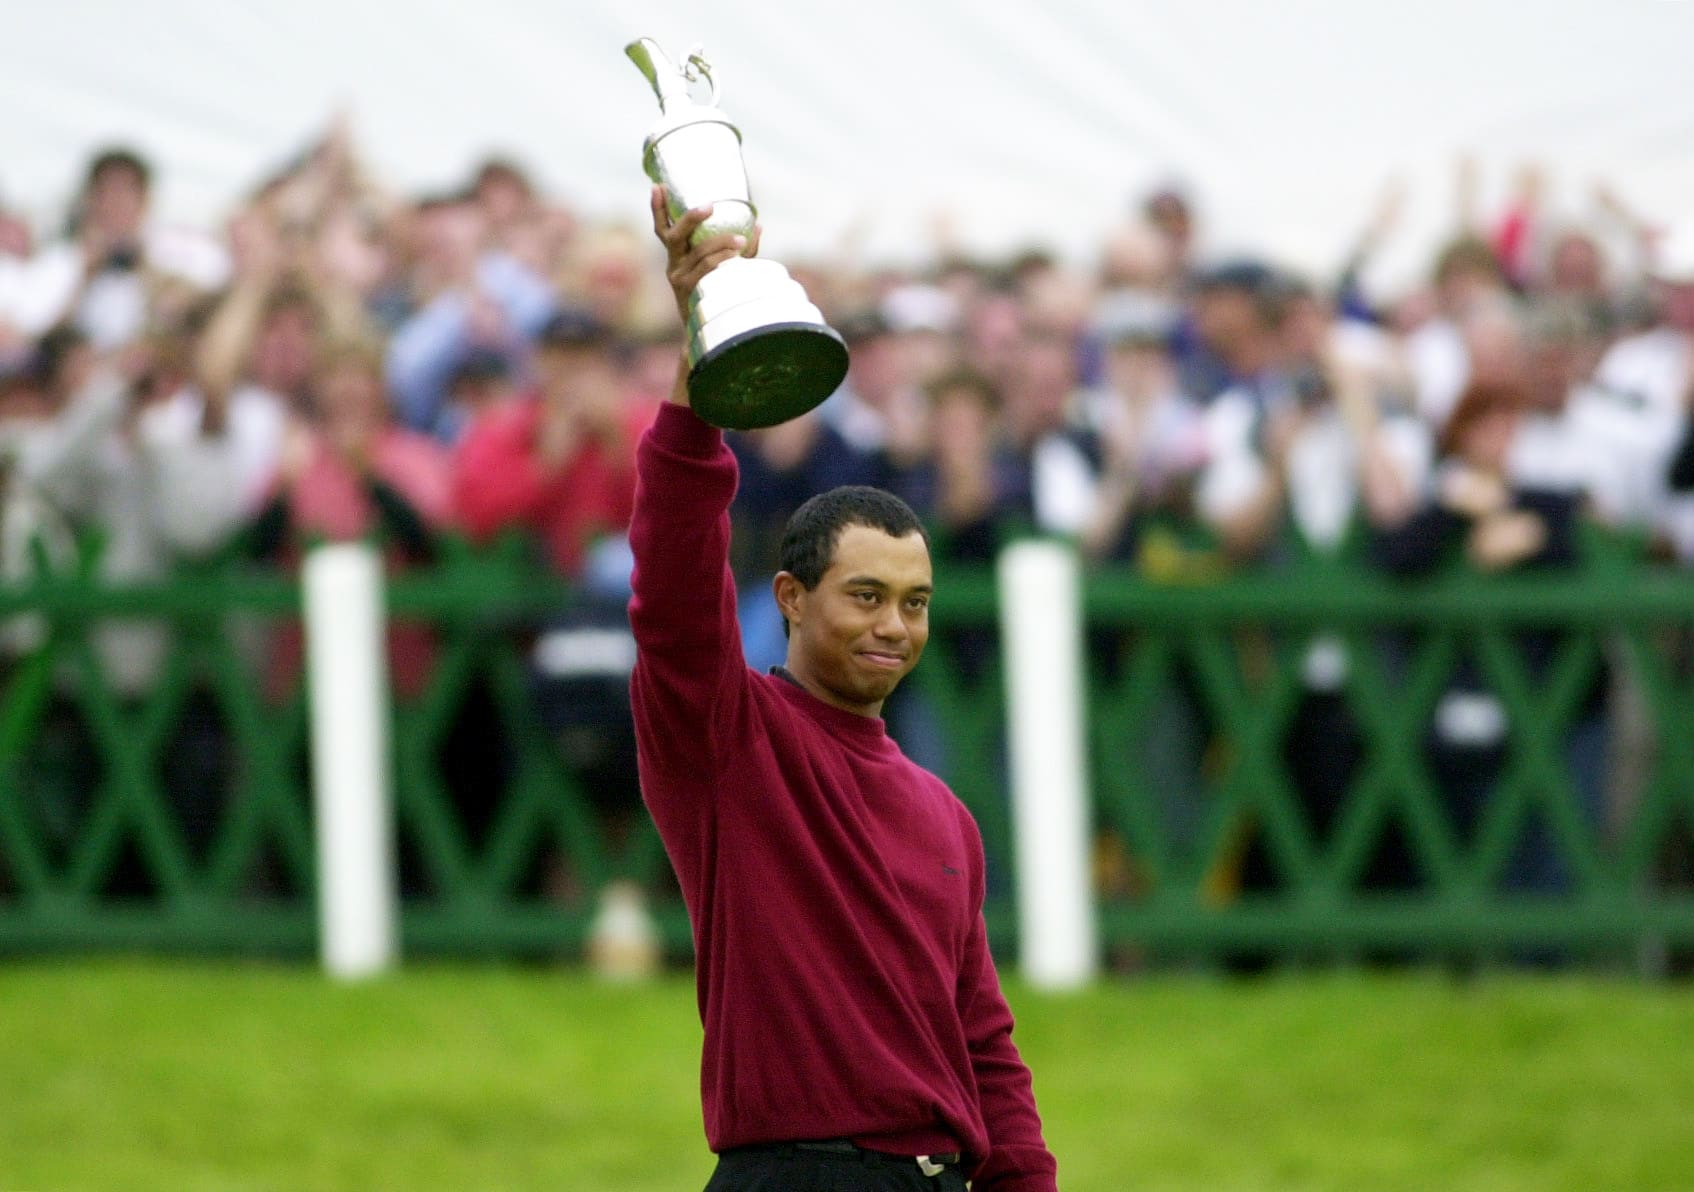 150th Open Championship: Looking back at 29 Opens at historic St. Andrews